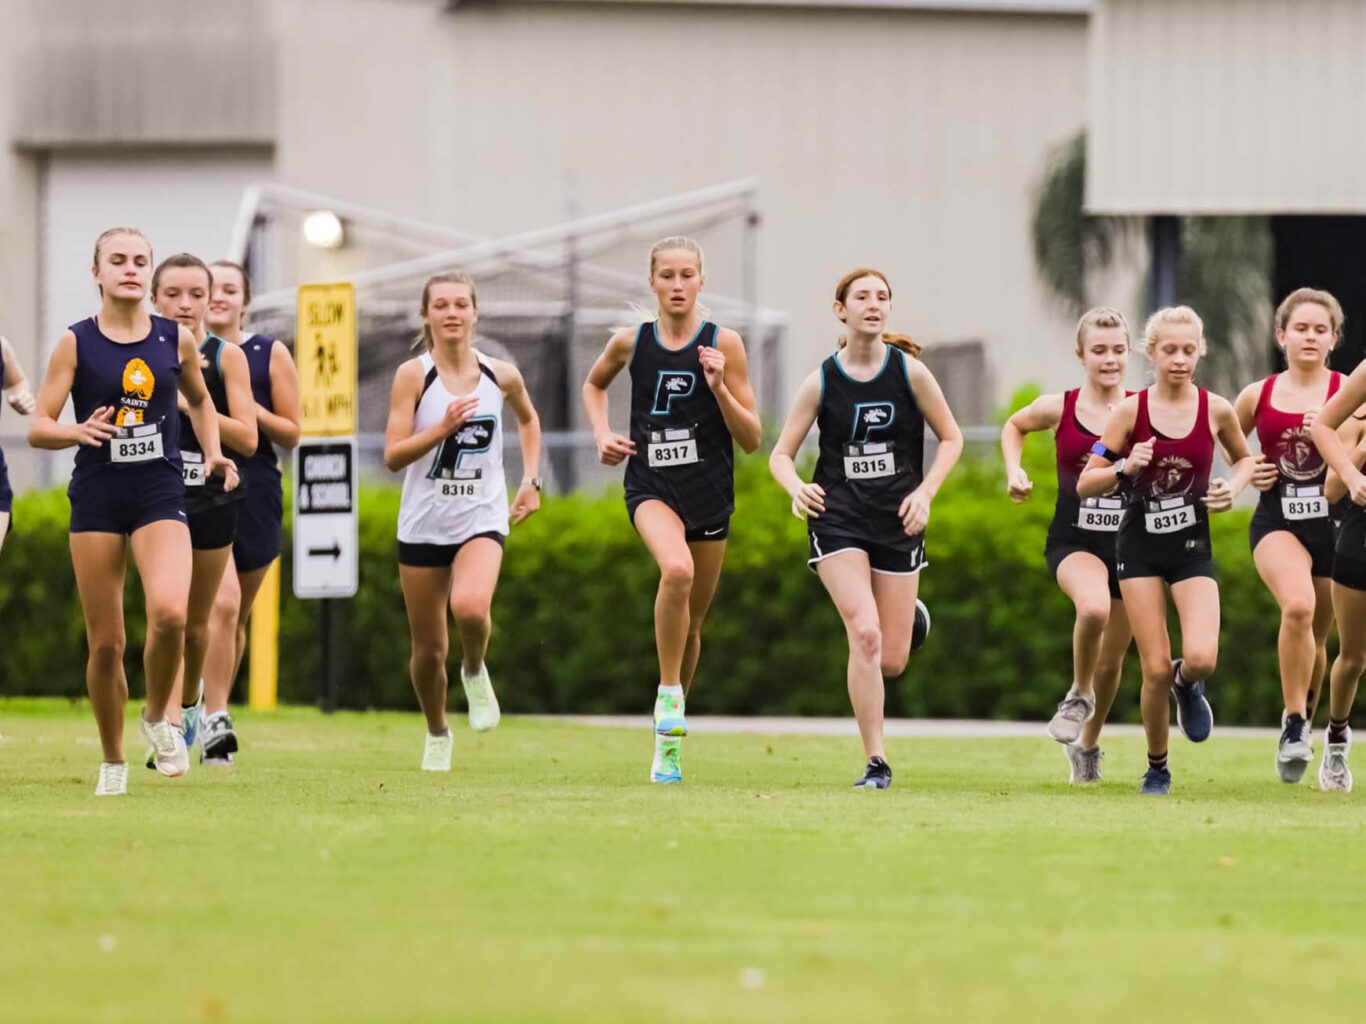 A team of girls participating in a cross country race.